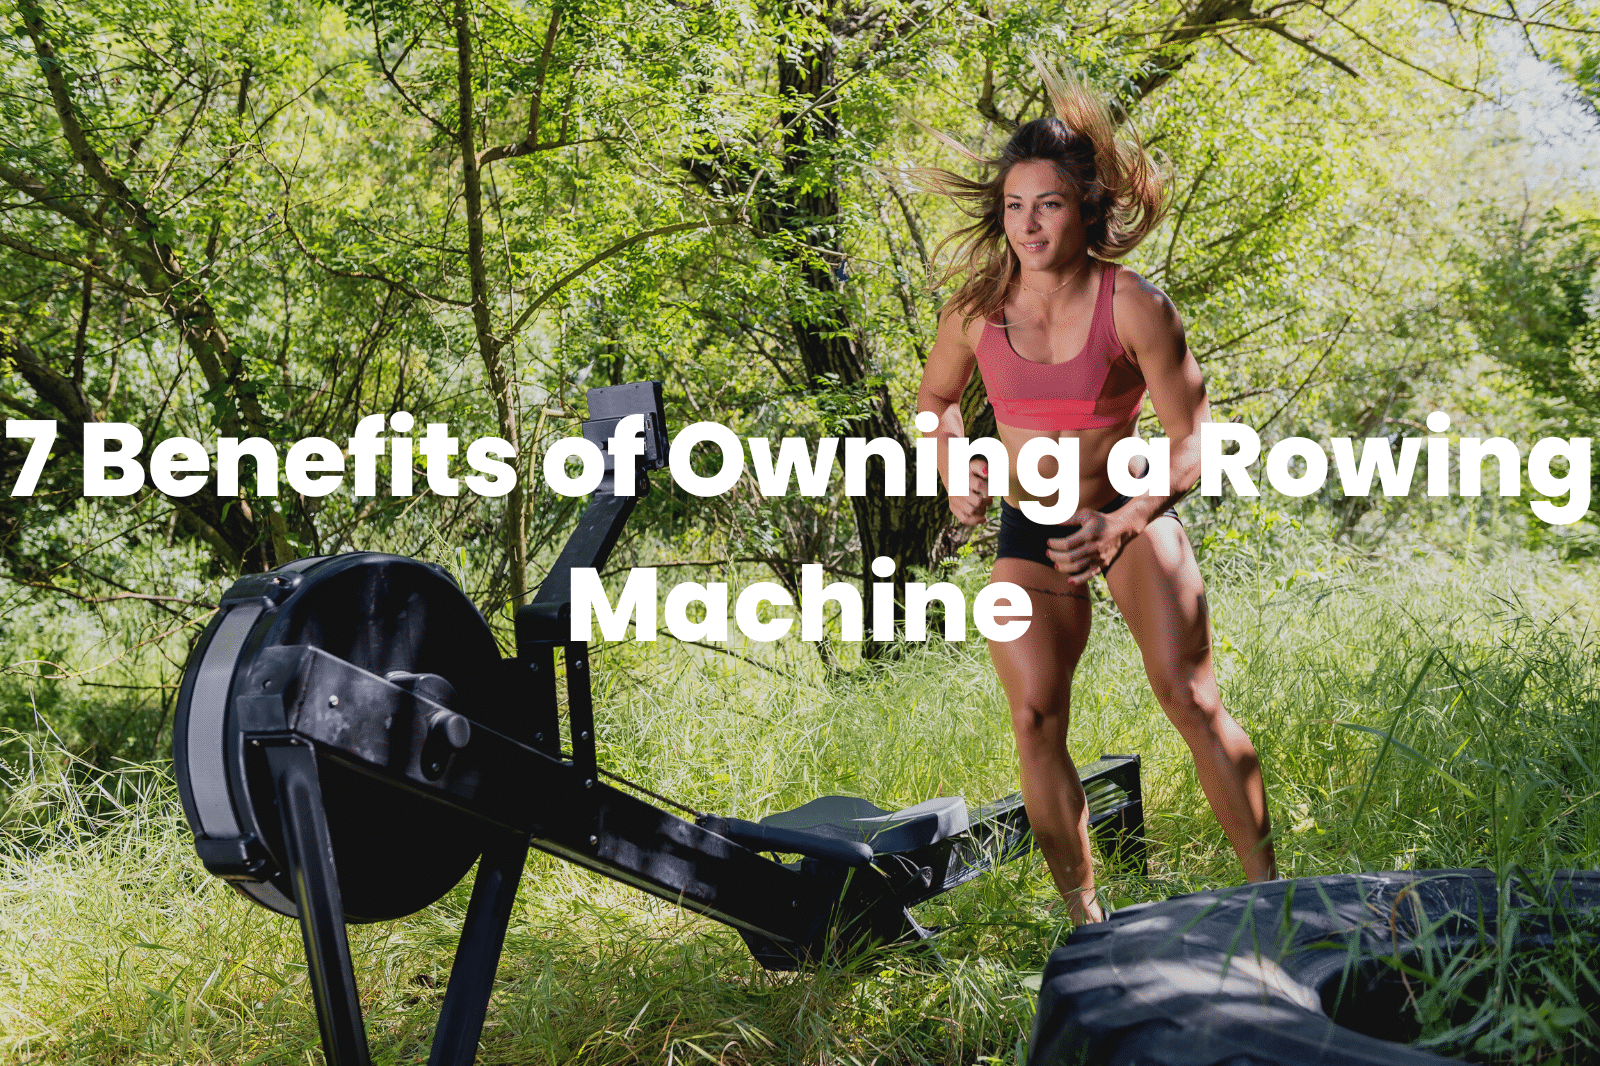 Benefits of Owning a Rowing Machine